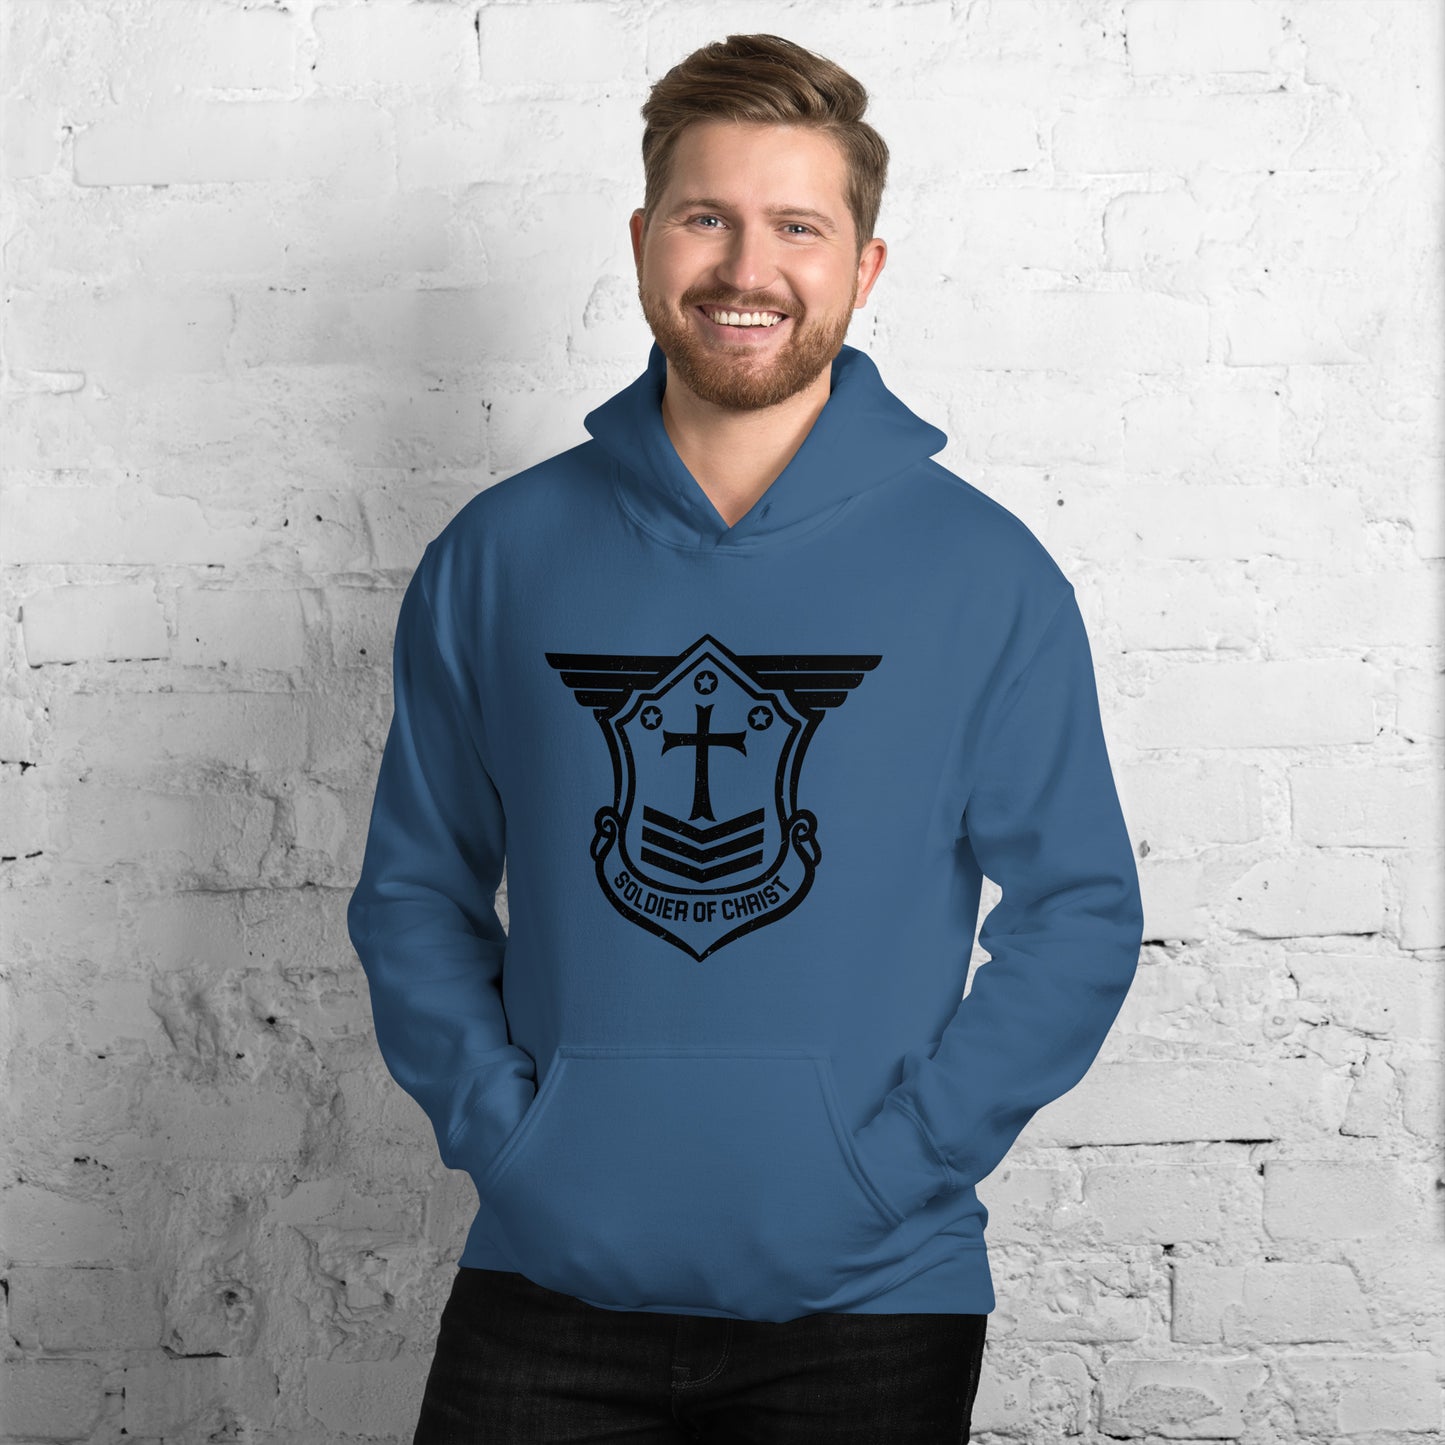 Unisex Hoodie with Black Soldier of Christ Emblem Front